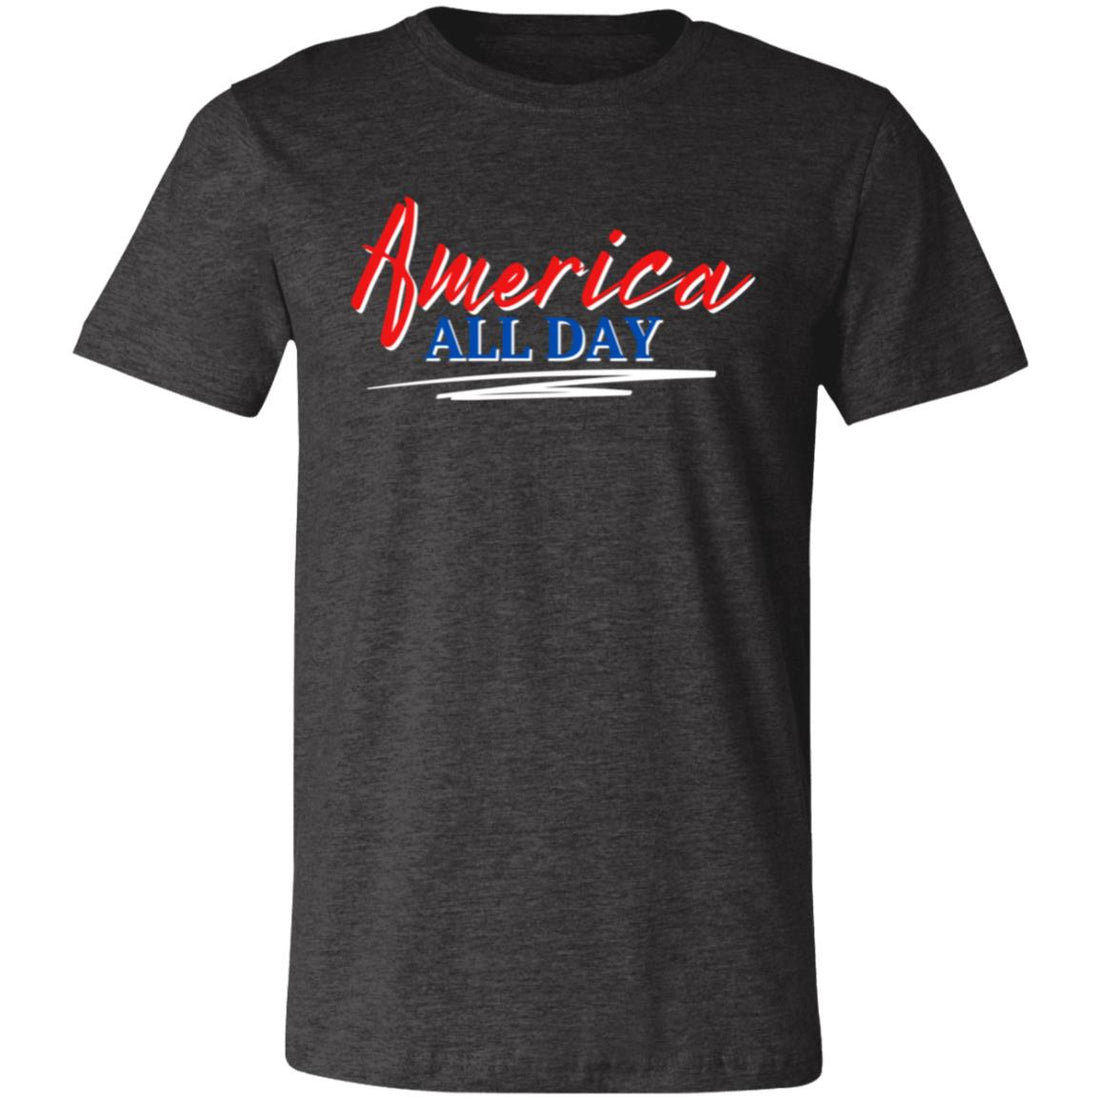 America All Day T-Shirt - T-Shirts - Positively Sassy - America All Day T-Shirt